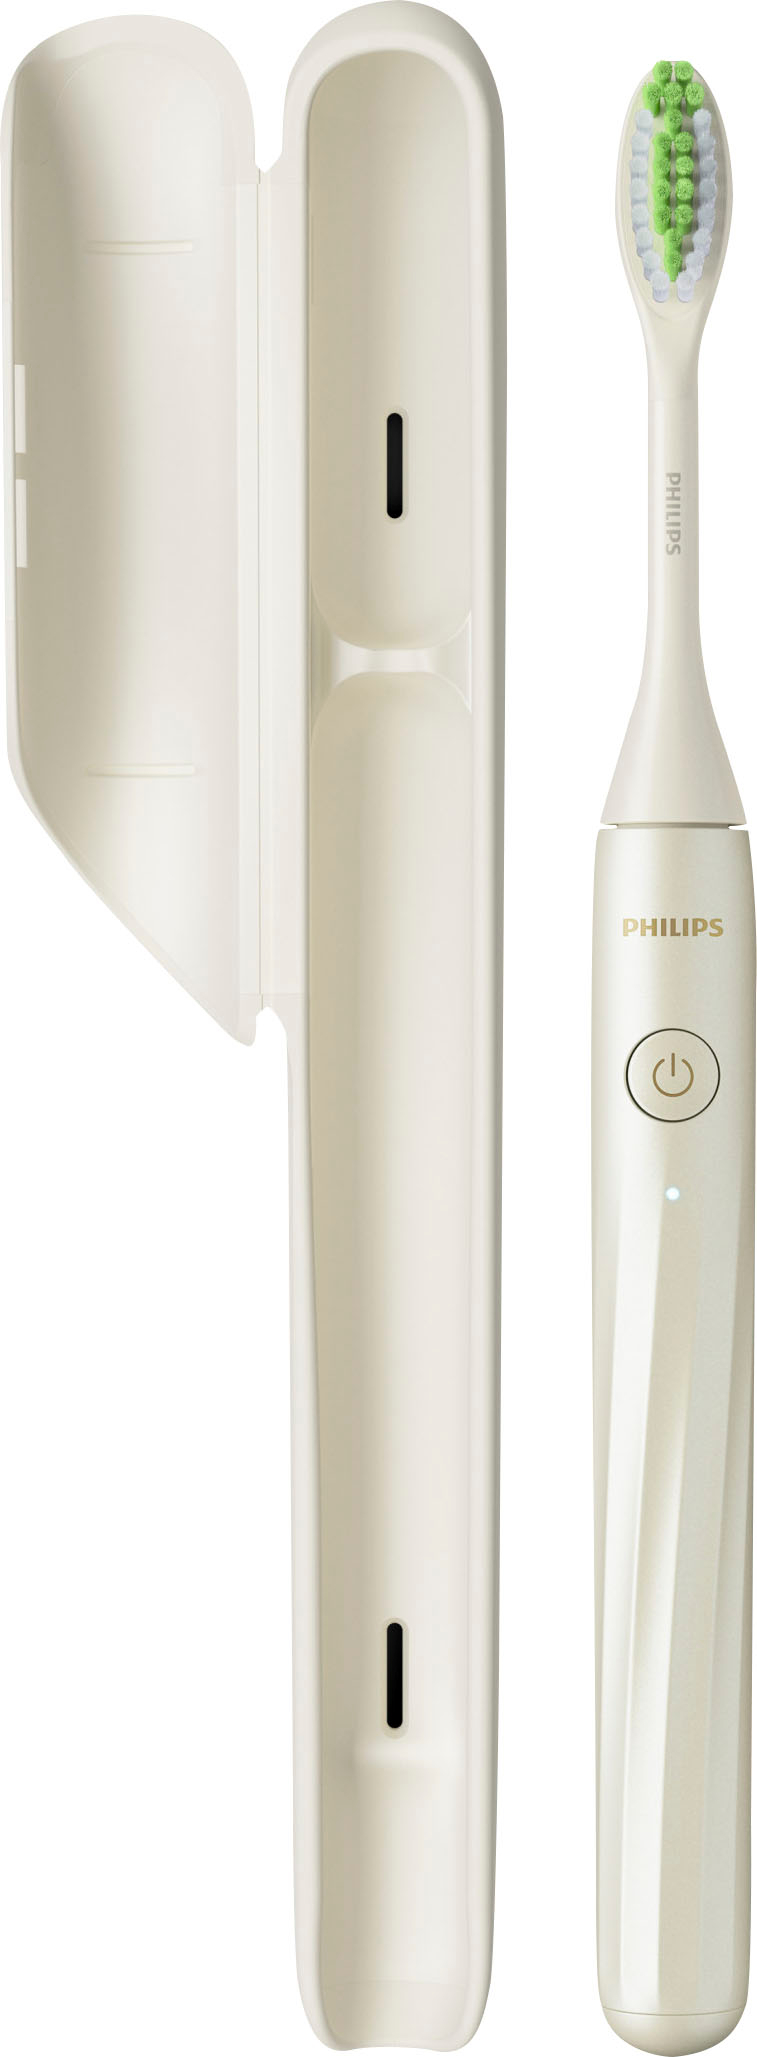 Angle View: Philips Sonicare - Philips One by Sonicare Rechargeable Toothbrush - Snow